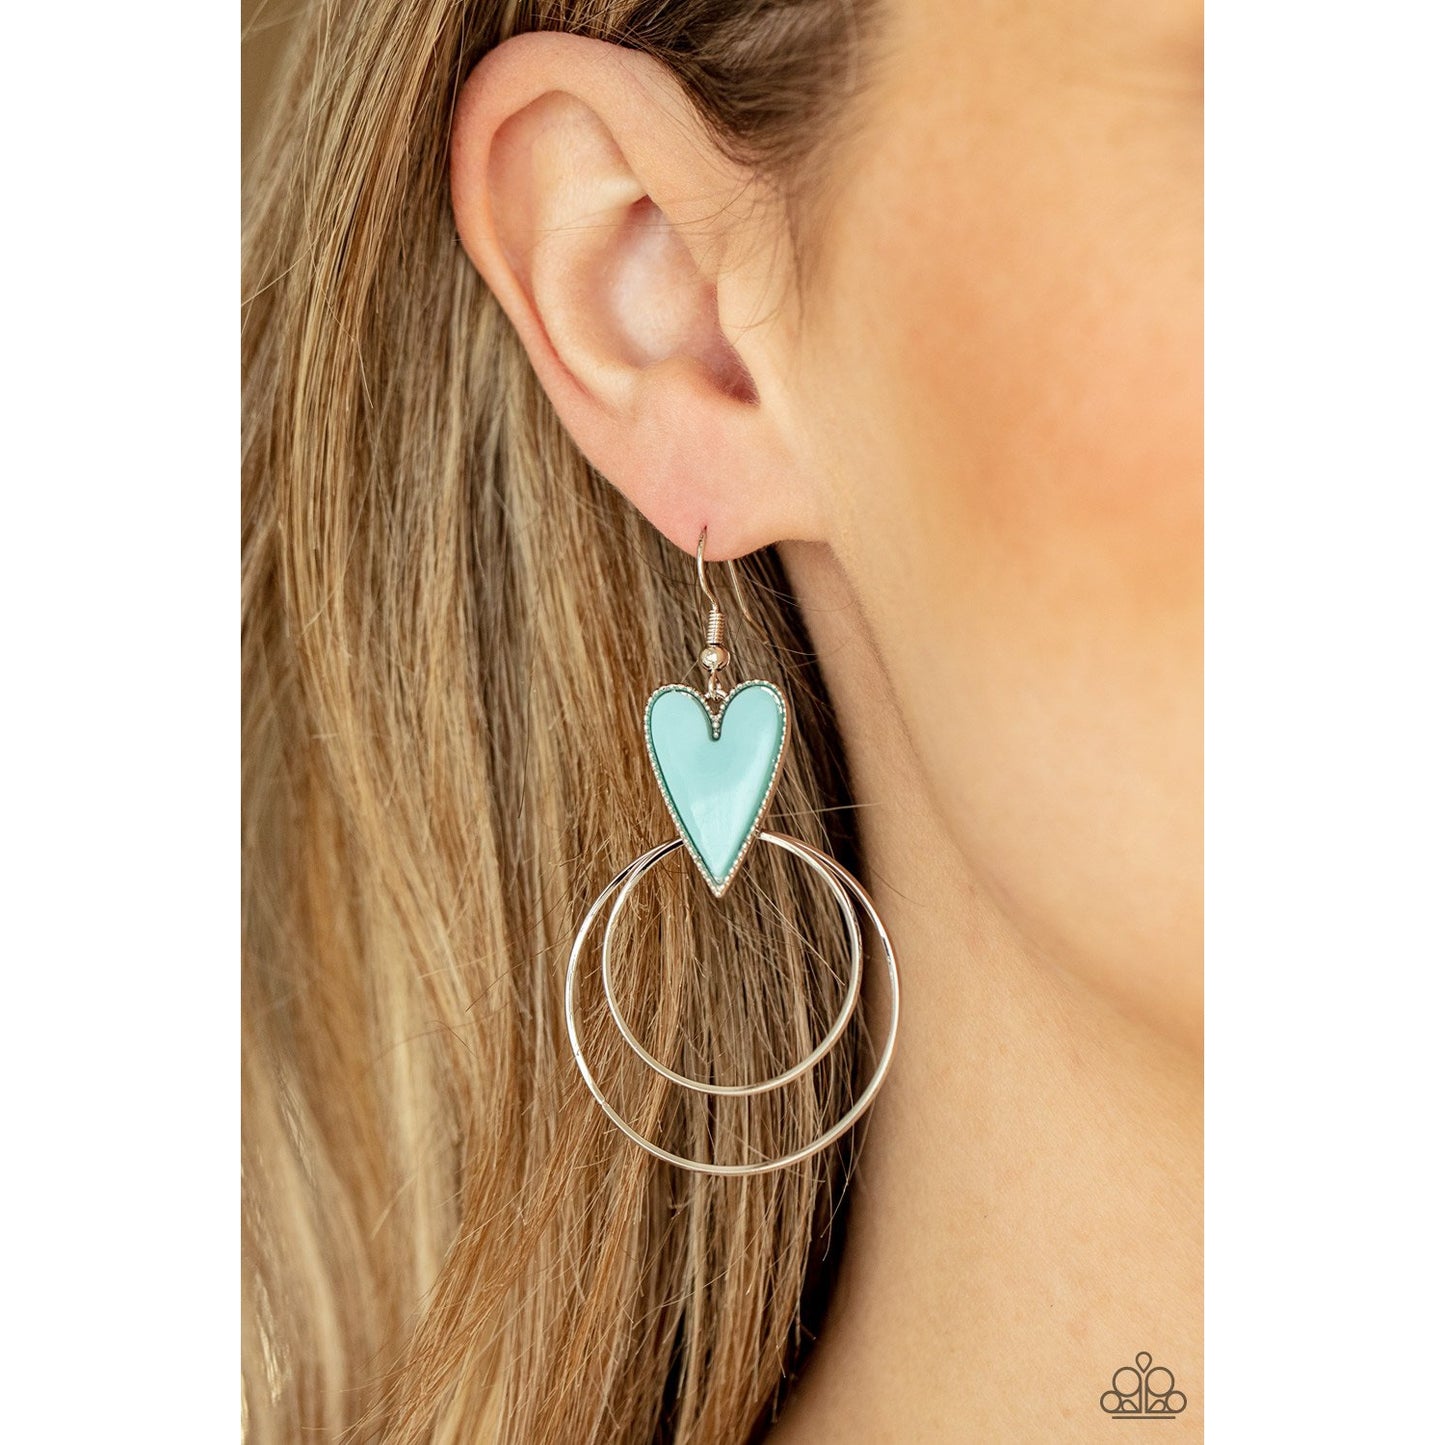 Happily Ever Hearts - Blue Heart Earrings - Paparazzi Accessories - GlaMarous Titi Jewels